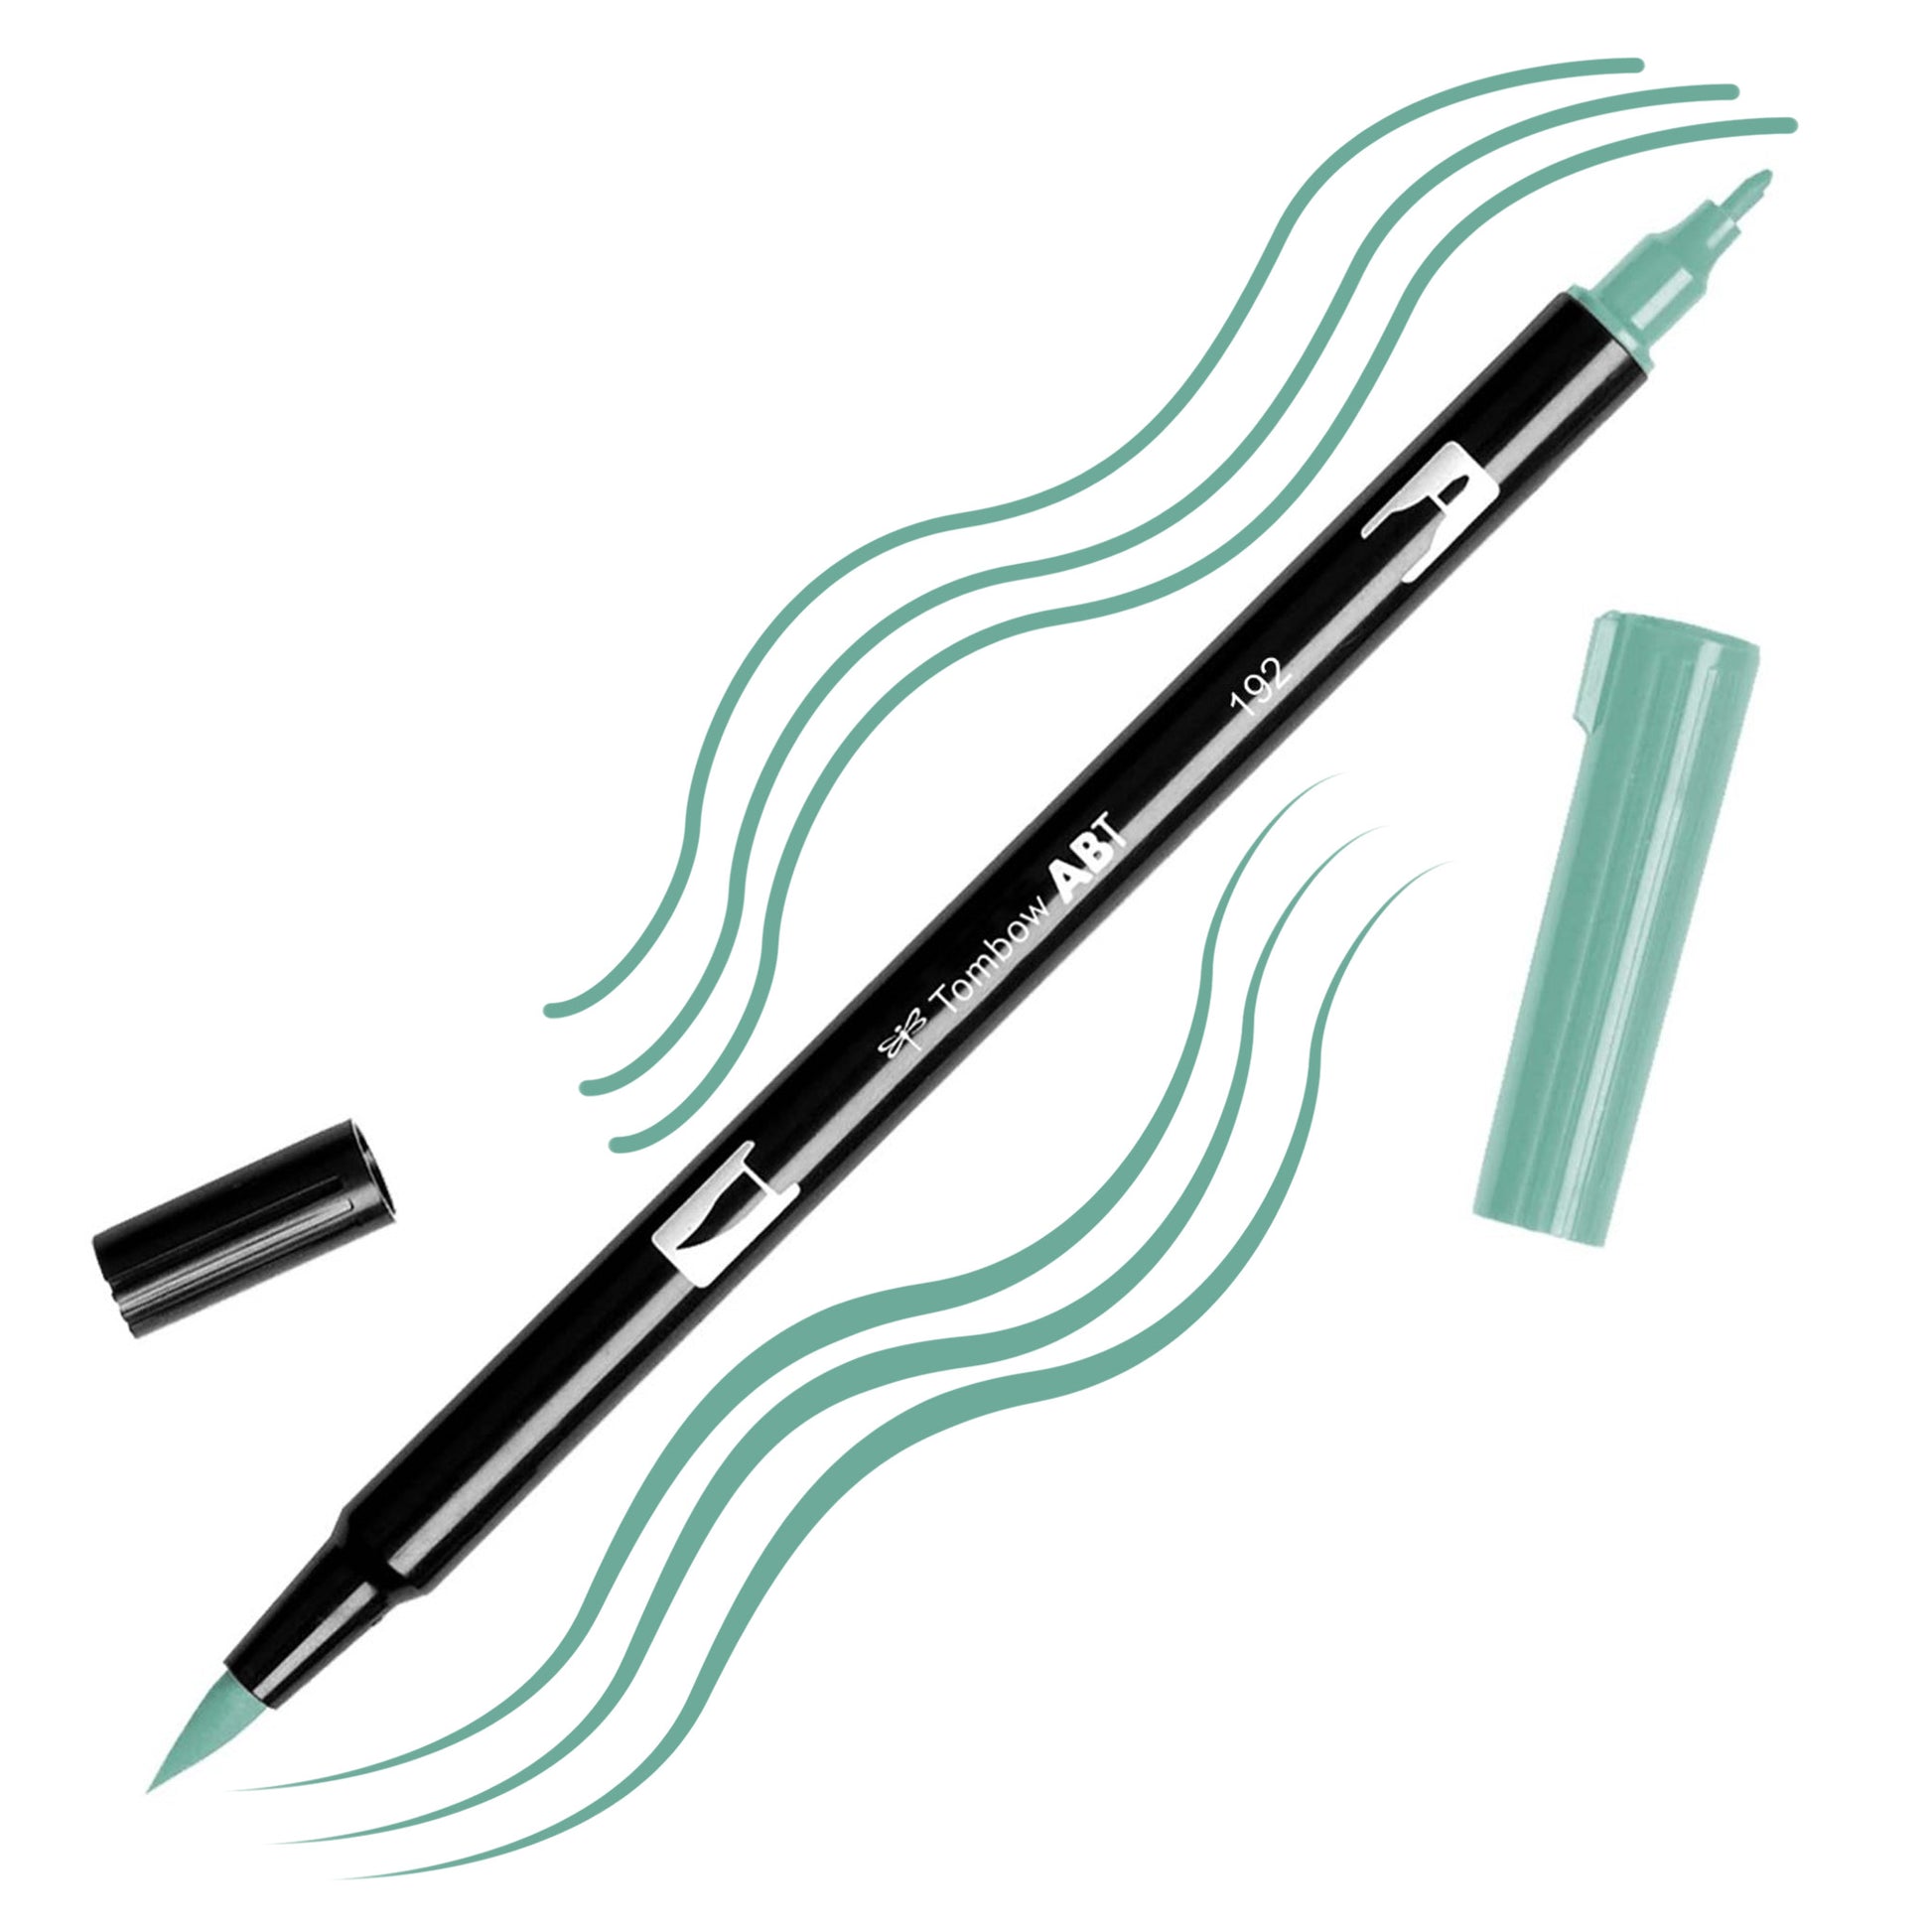 Asparagus Tombow double-headed brush-pen with a flexible nylon fiber brush tip and a fine tip against a white background with Asparagus strokes